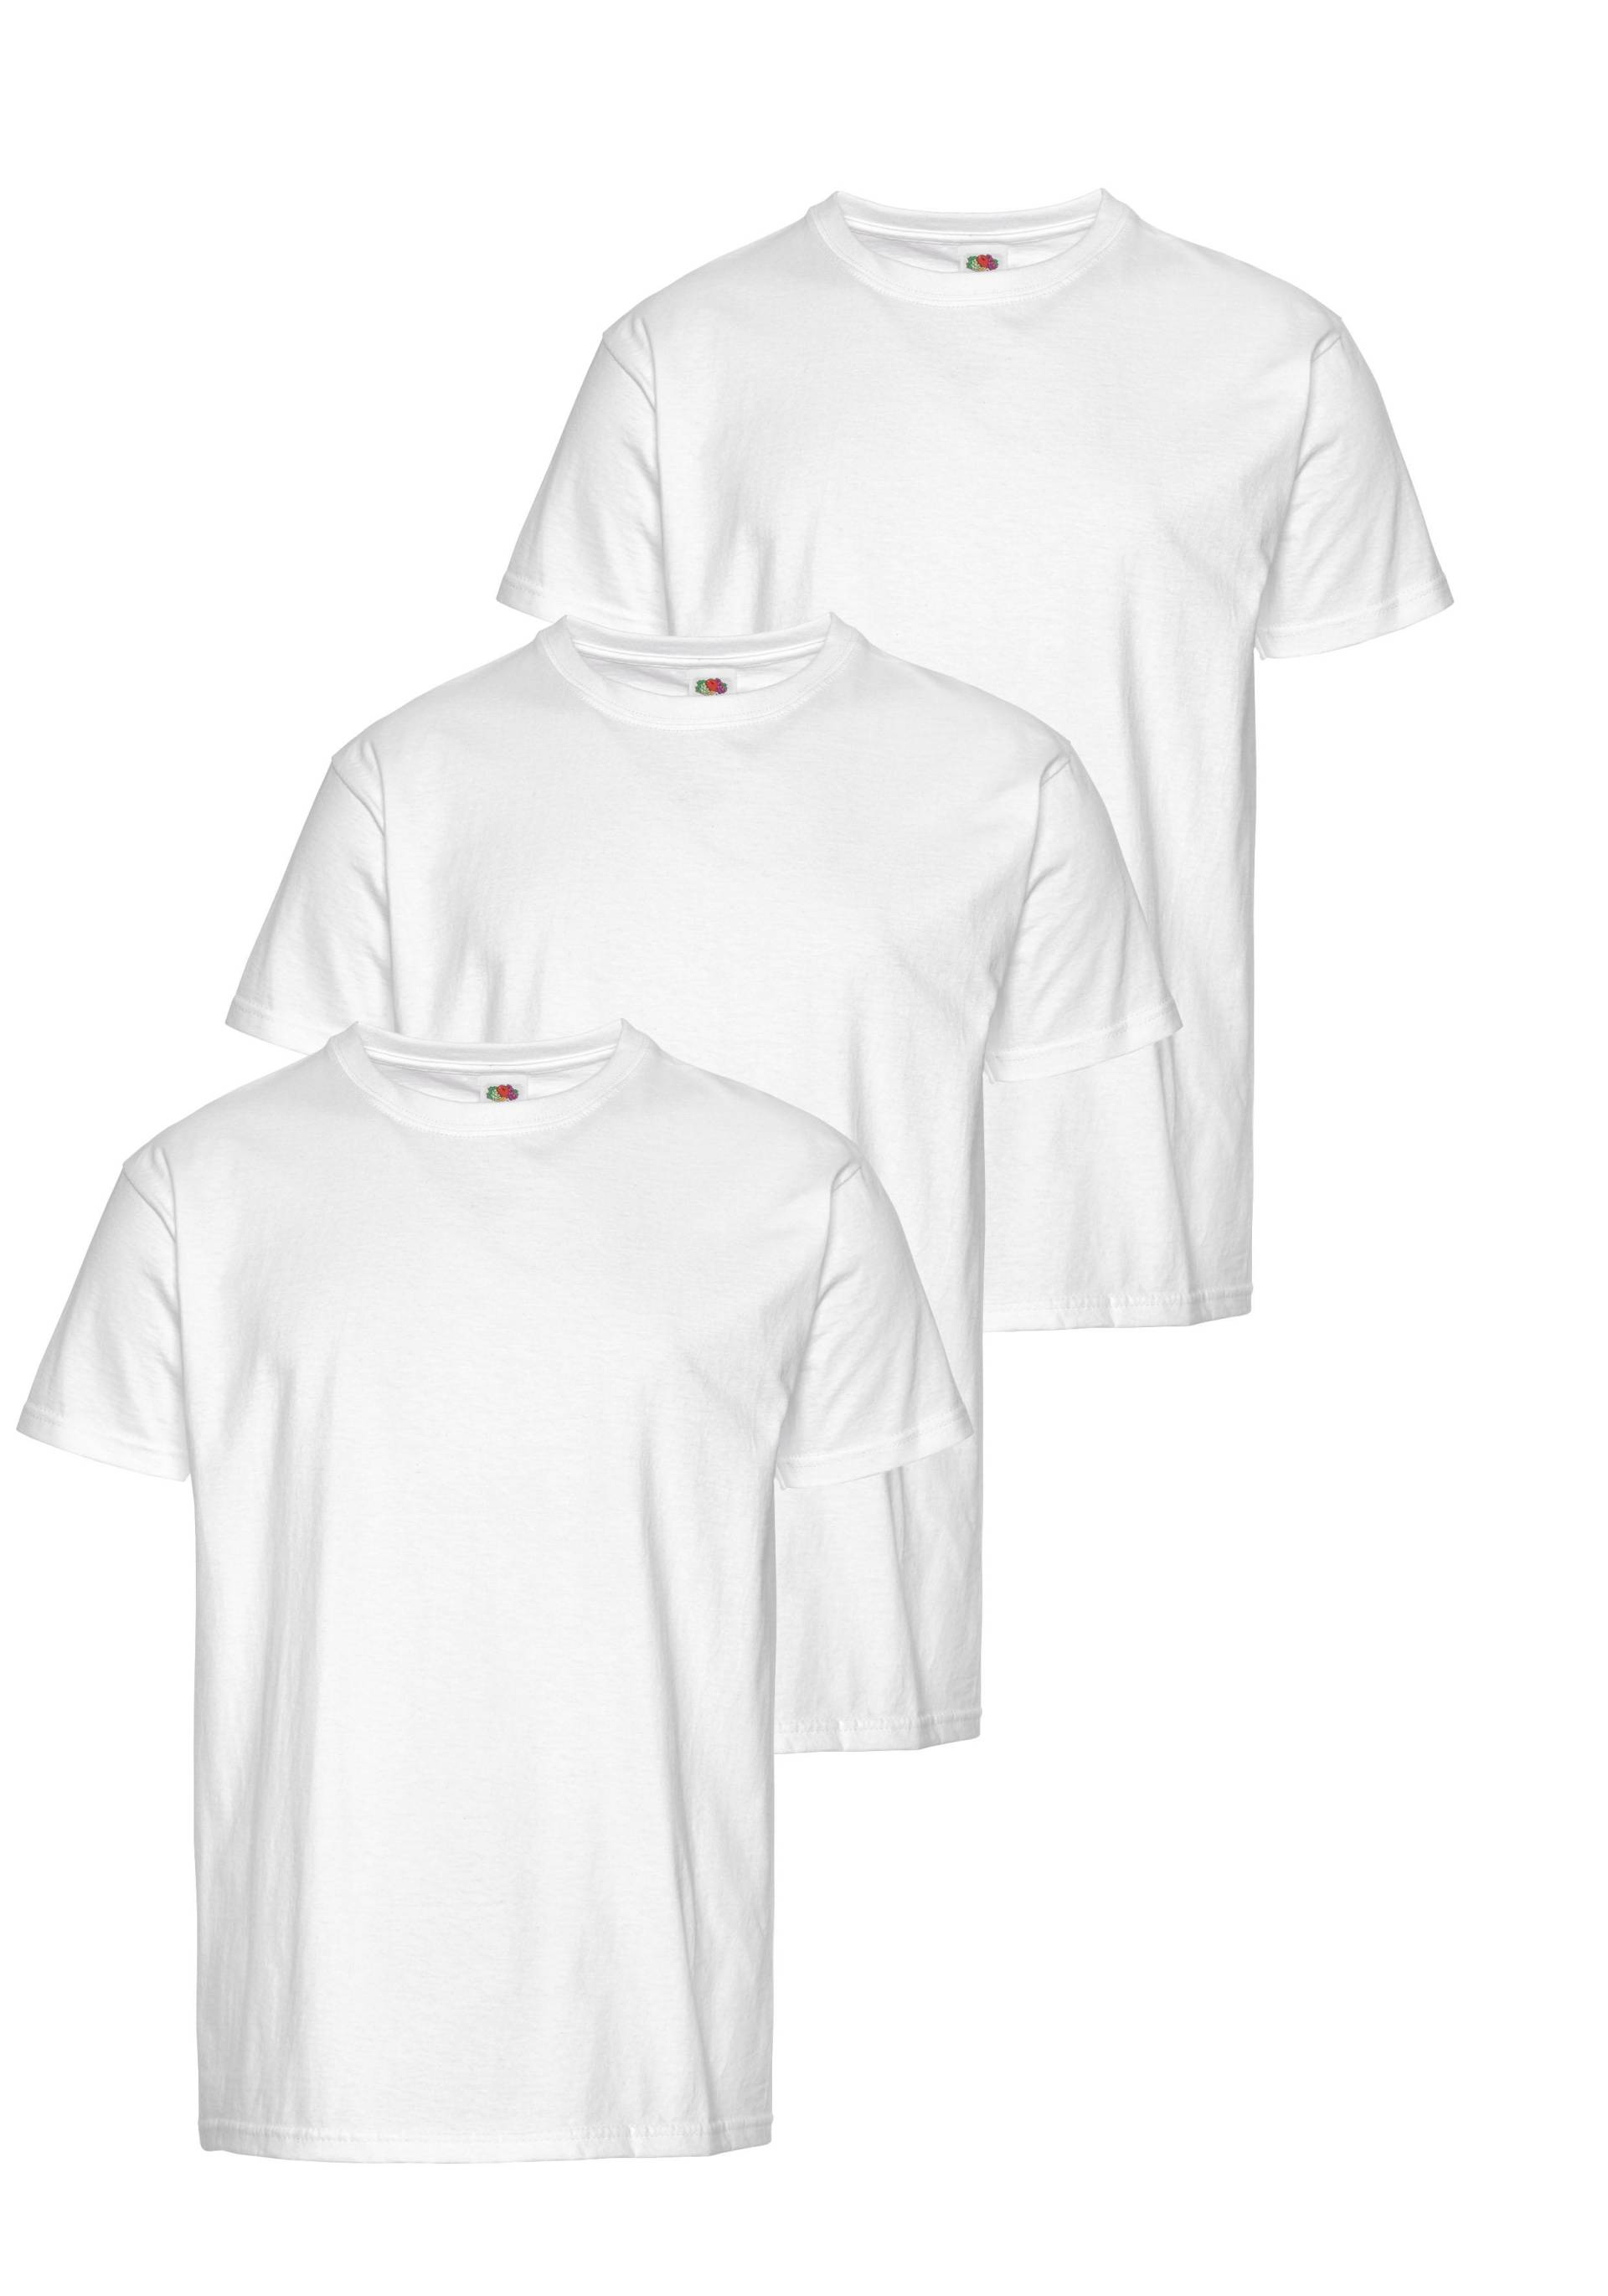 Fruit of the Loom T-Shirt, (Packung, 3 tlg.) von Fruit of the Loom